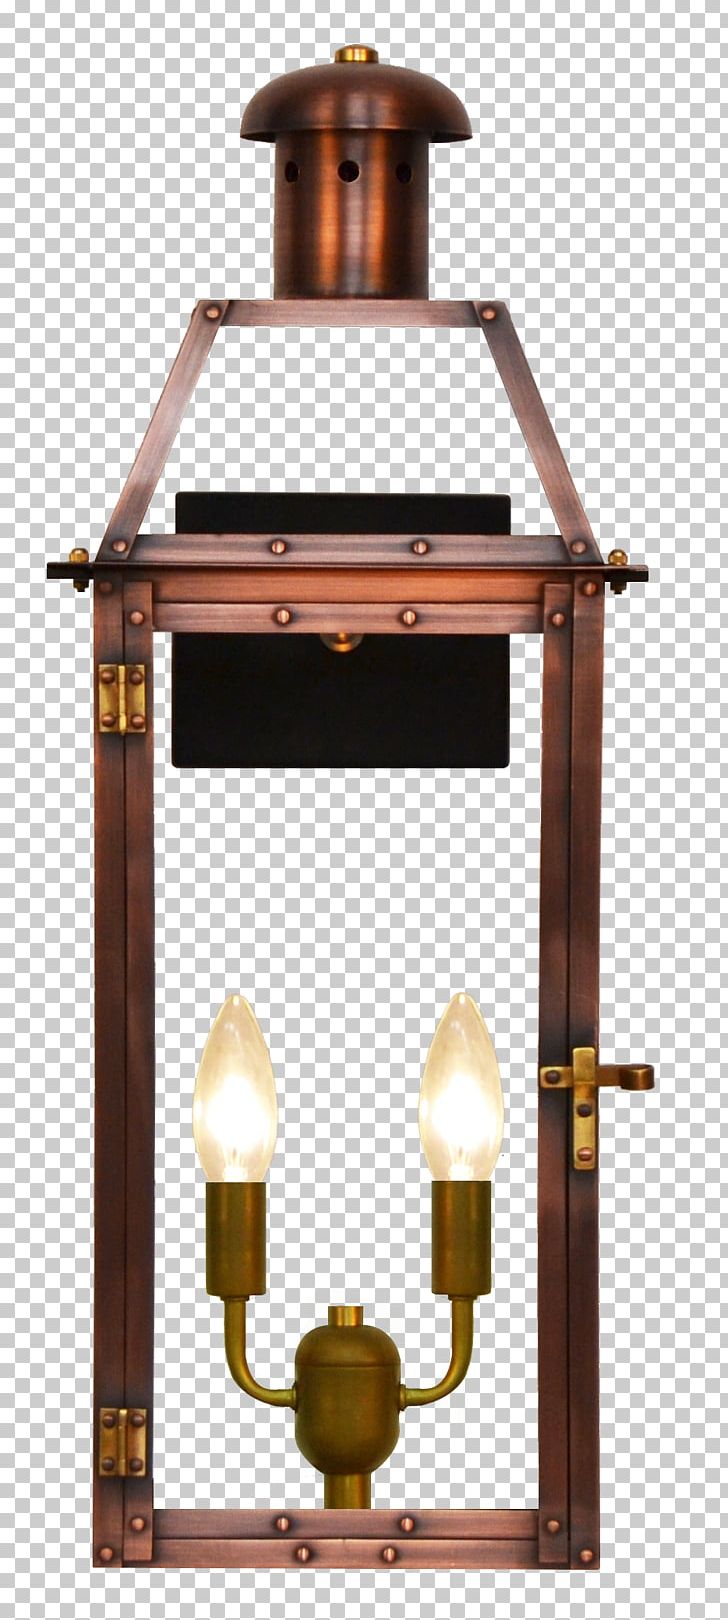 Gas Lighting Lantern Natural Gas Coppersmith PNG, Clipart, Ceiling Fixture, Copper, Coppersmith, Electric, Electricity Free PNG Download